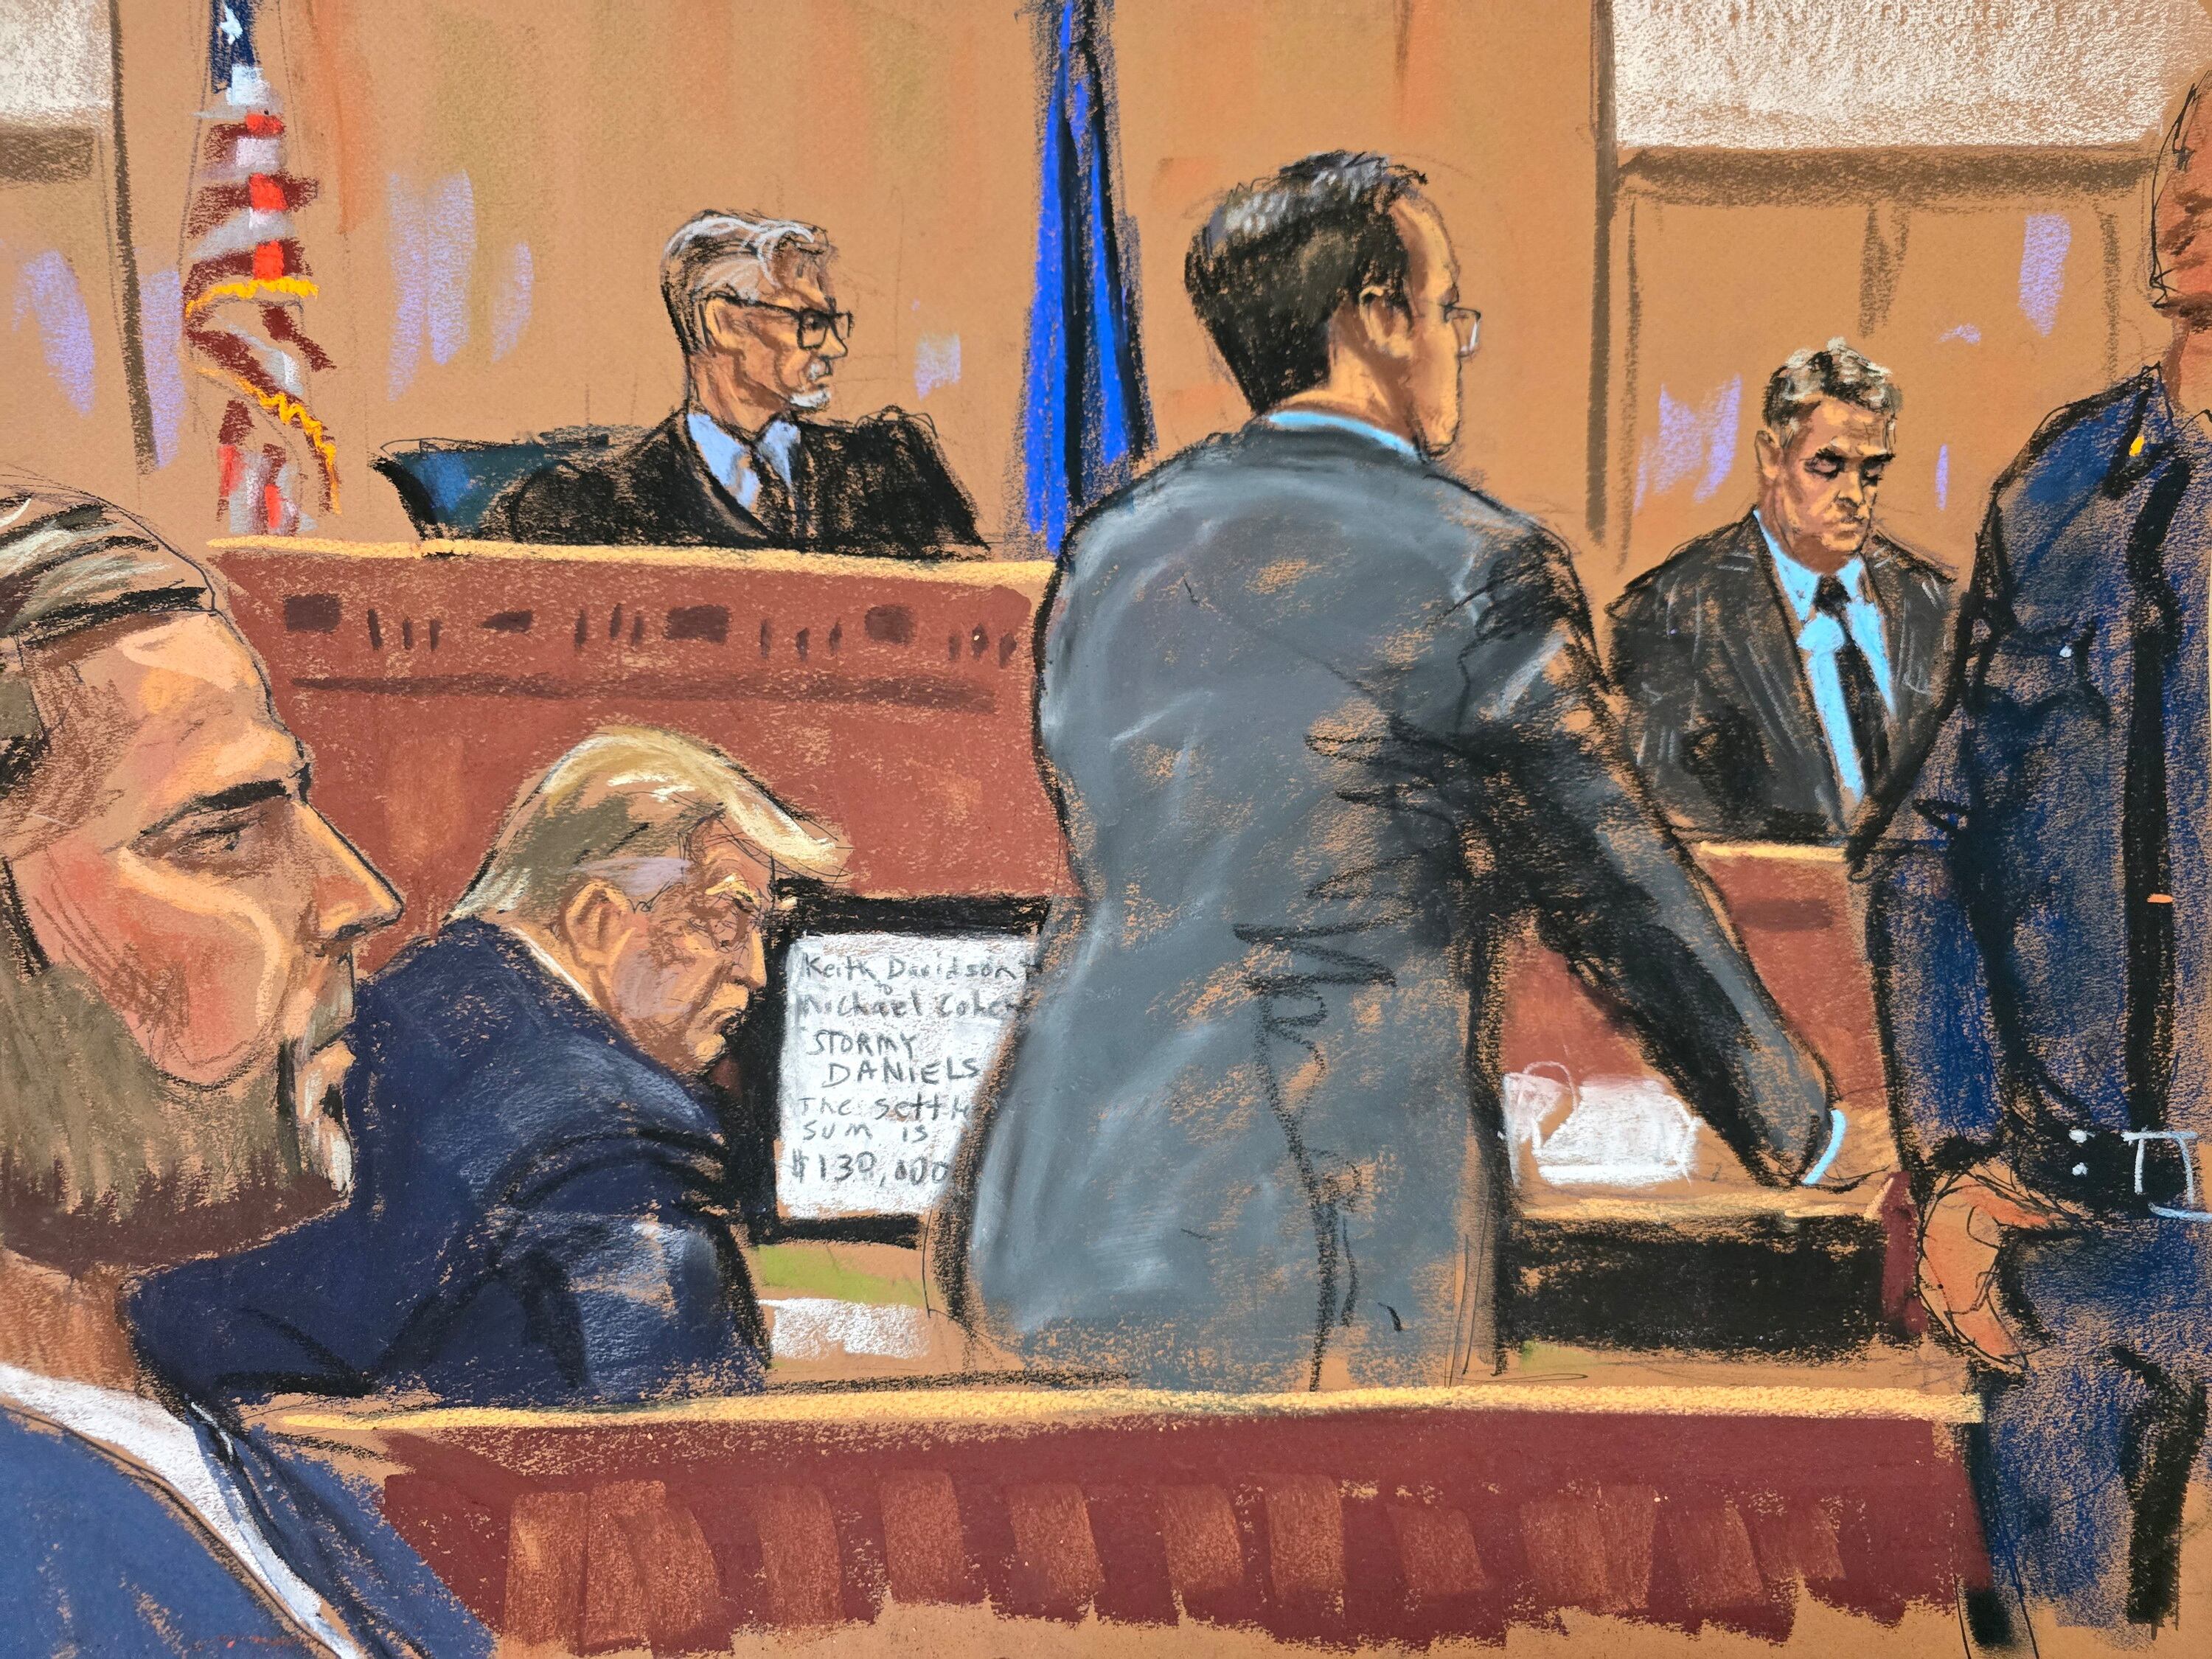 A courtroom sketch of Donald Trump during the Stormy Daniels trial, with Judge Merchan in the background.